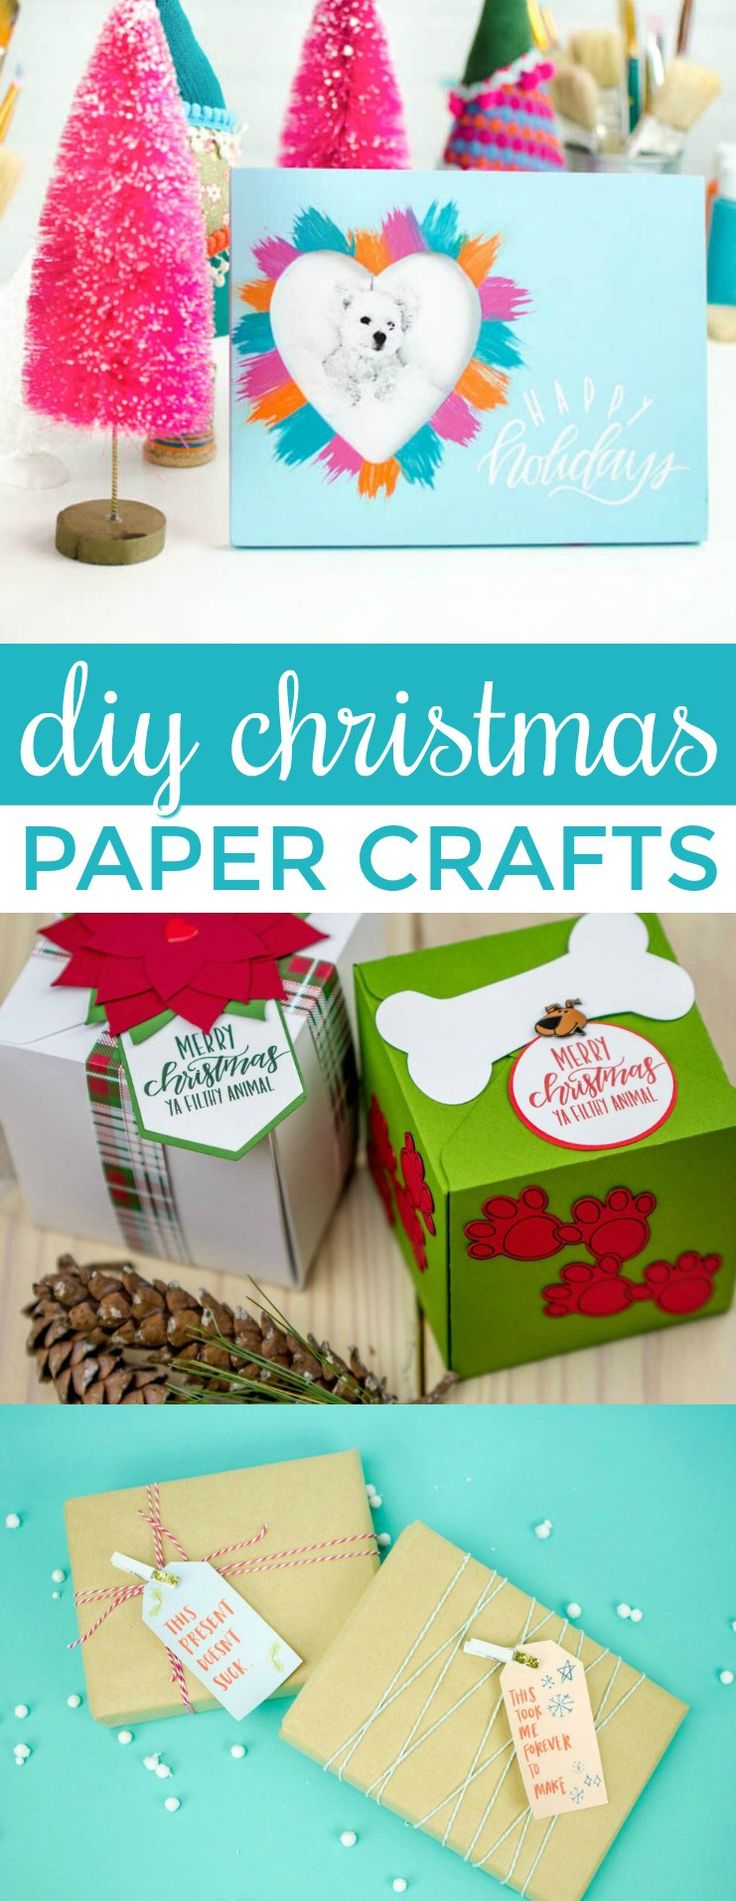 DIY ChristmasI wanted to get creative and think of some super useful DIY Christ...